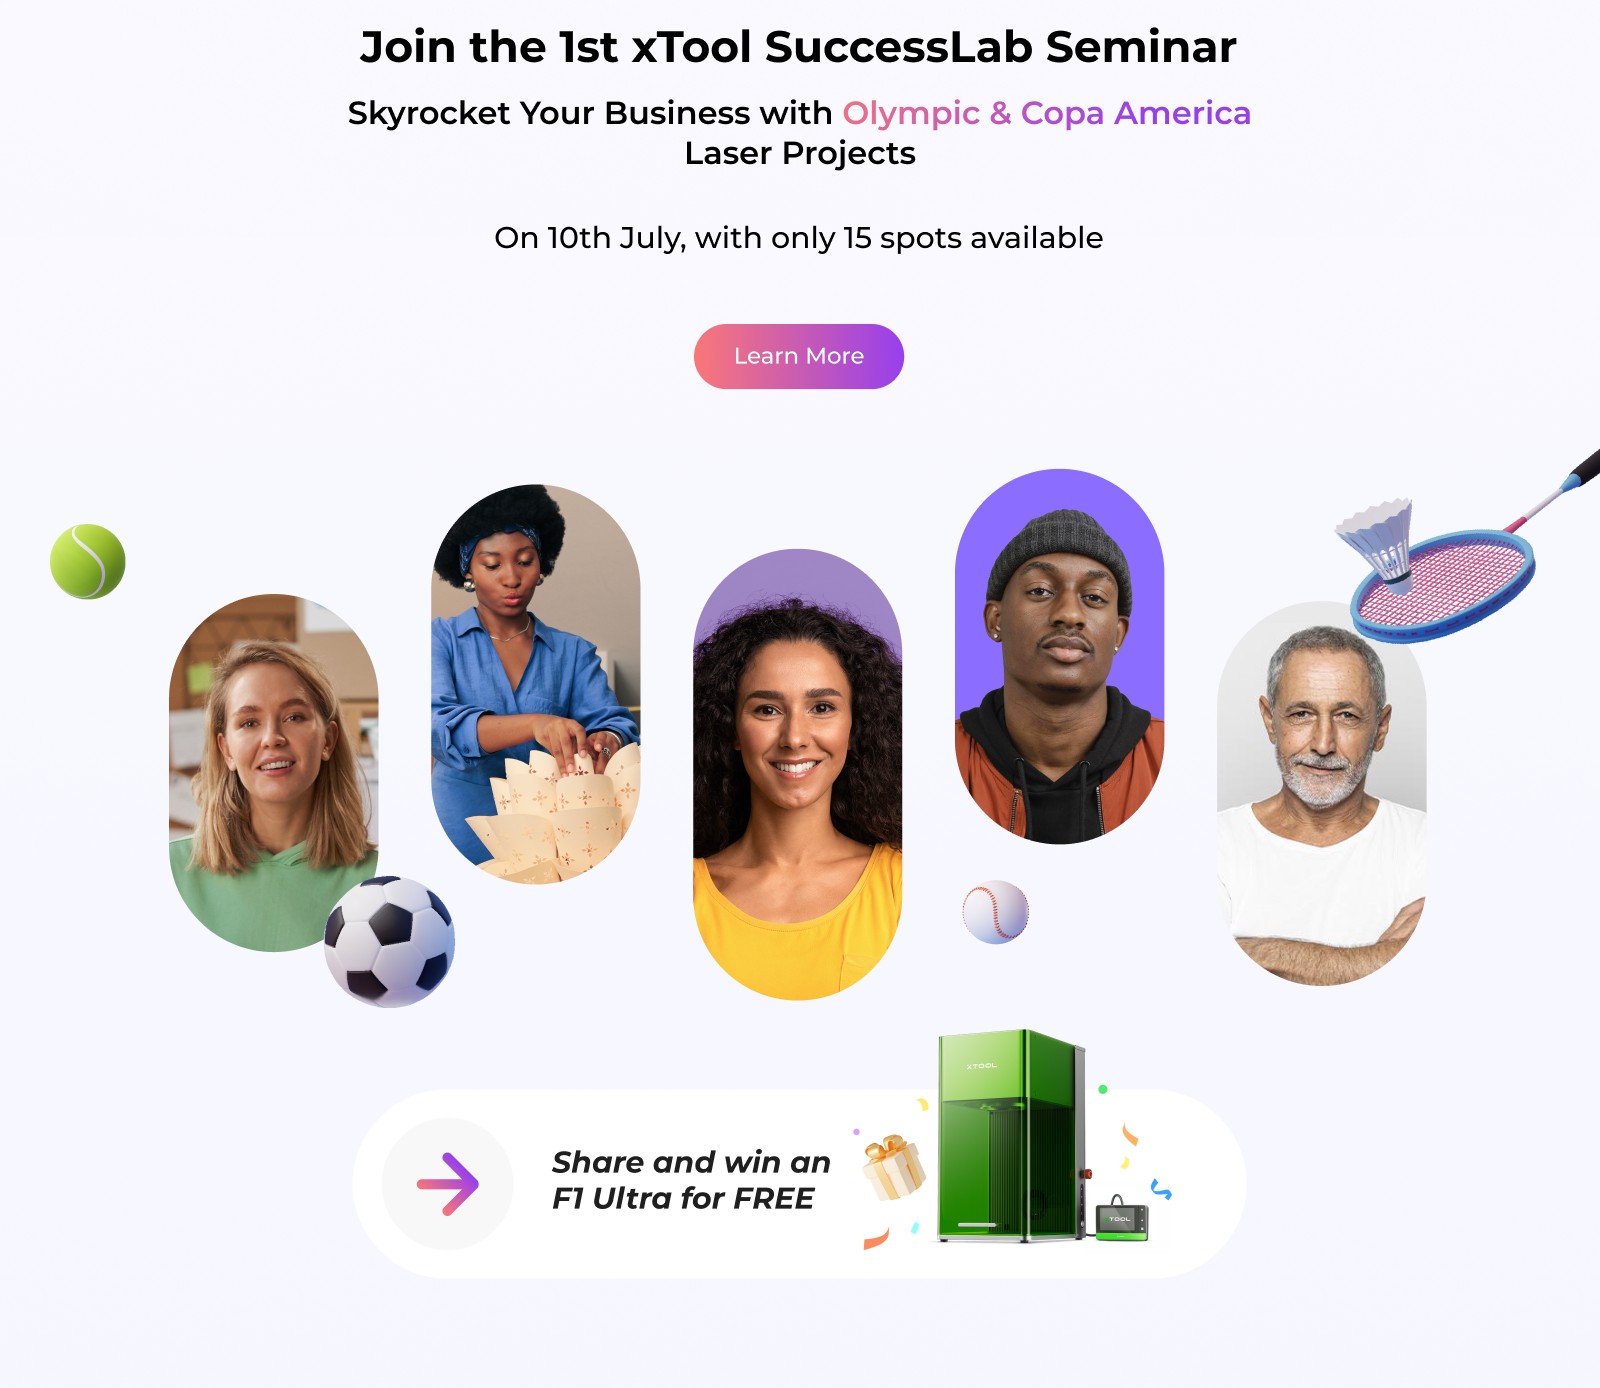 Join the 1st xTool SuccessLab Seminar